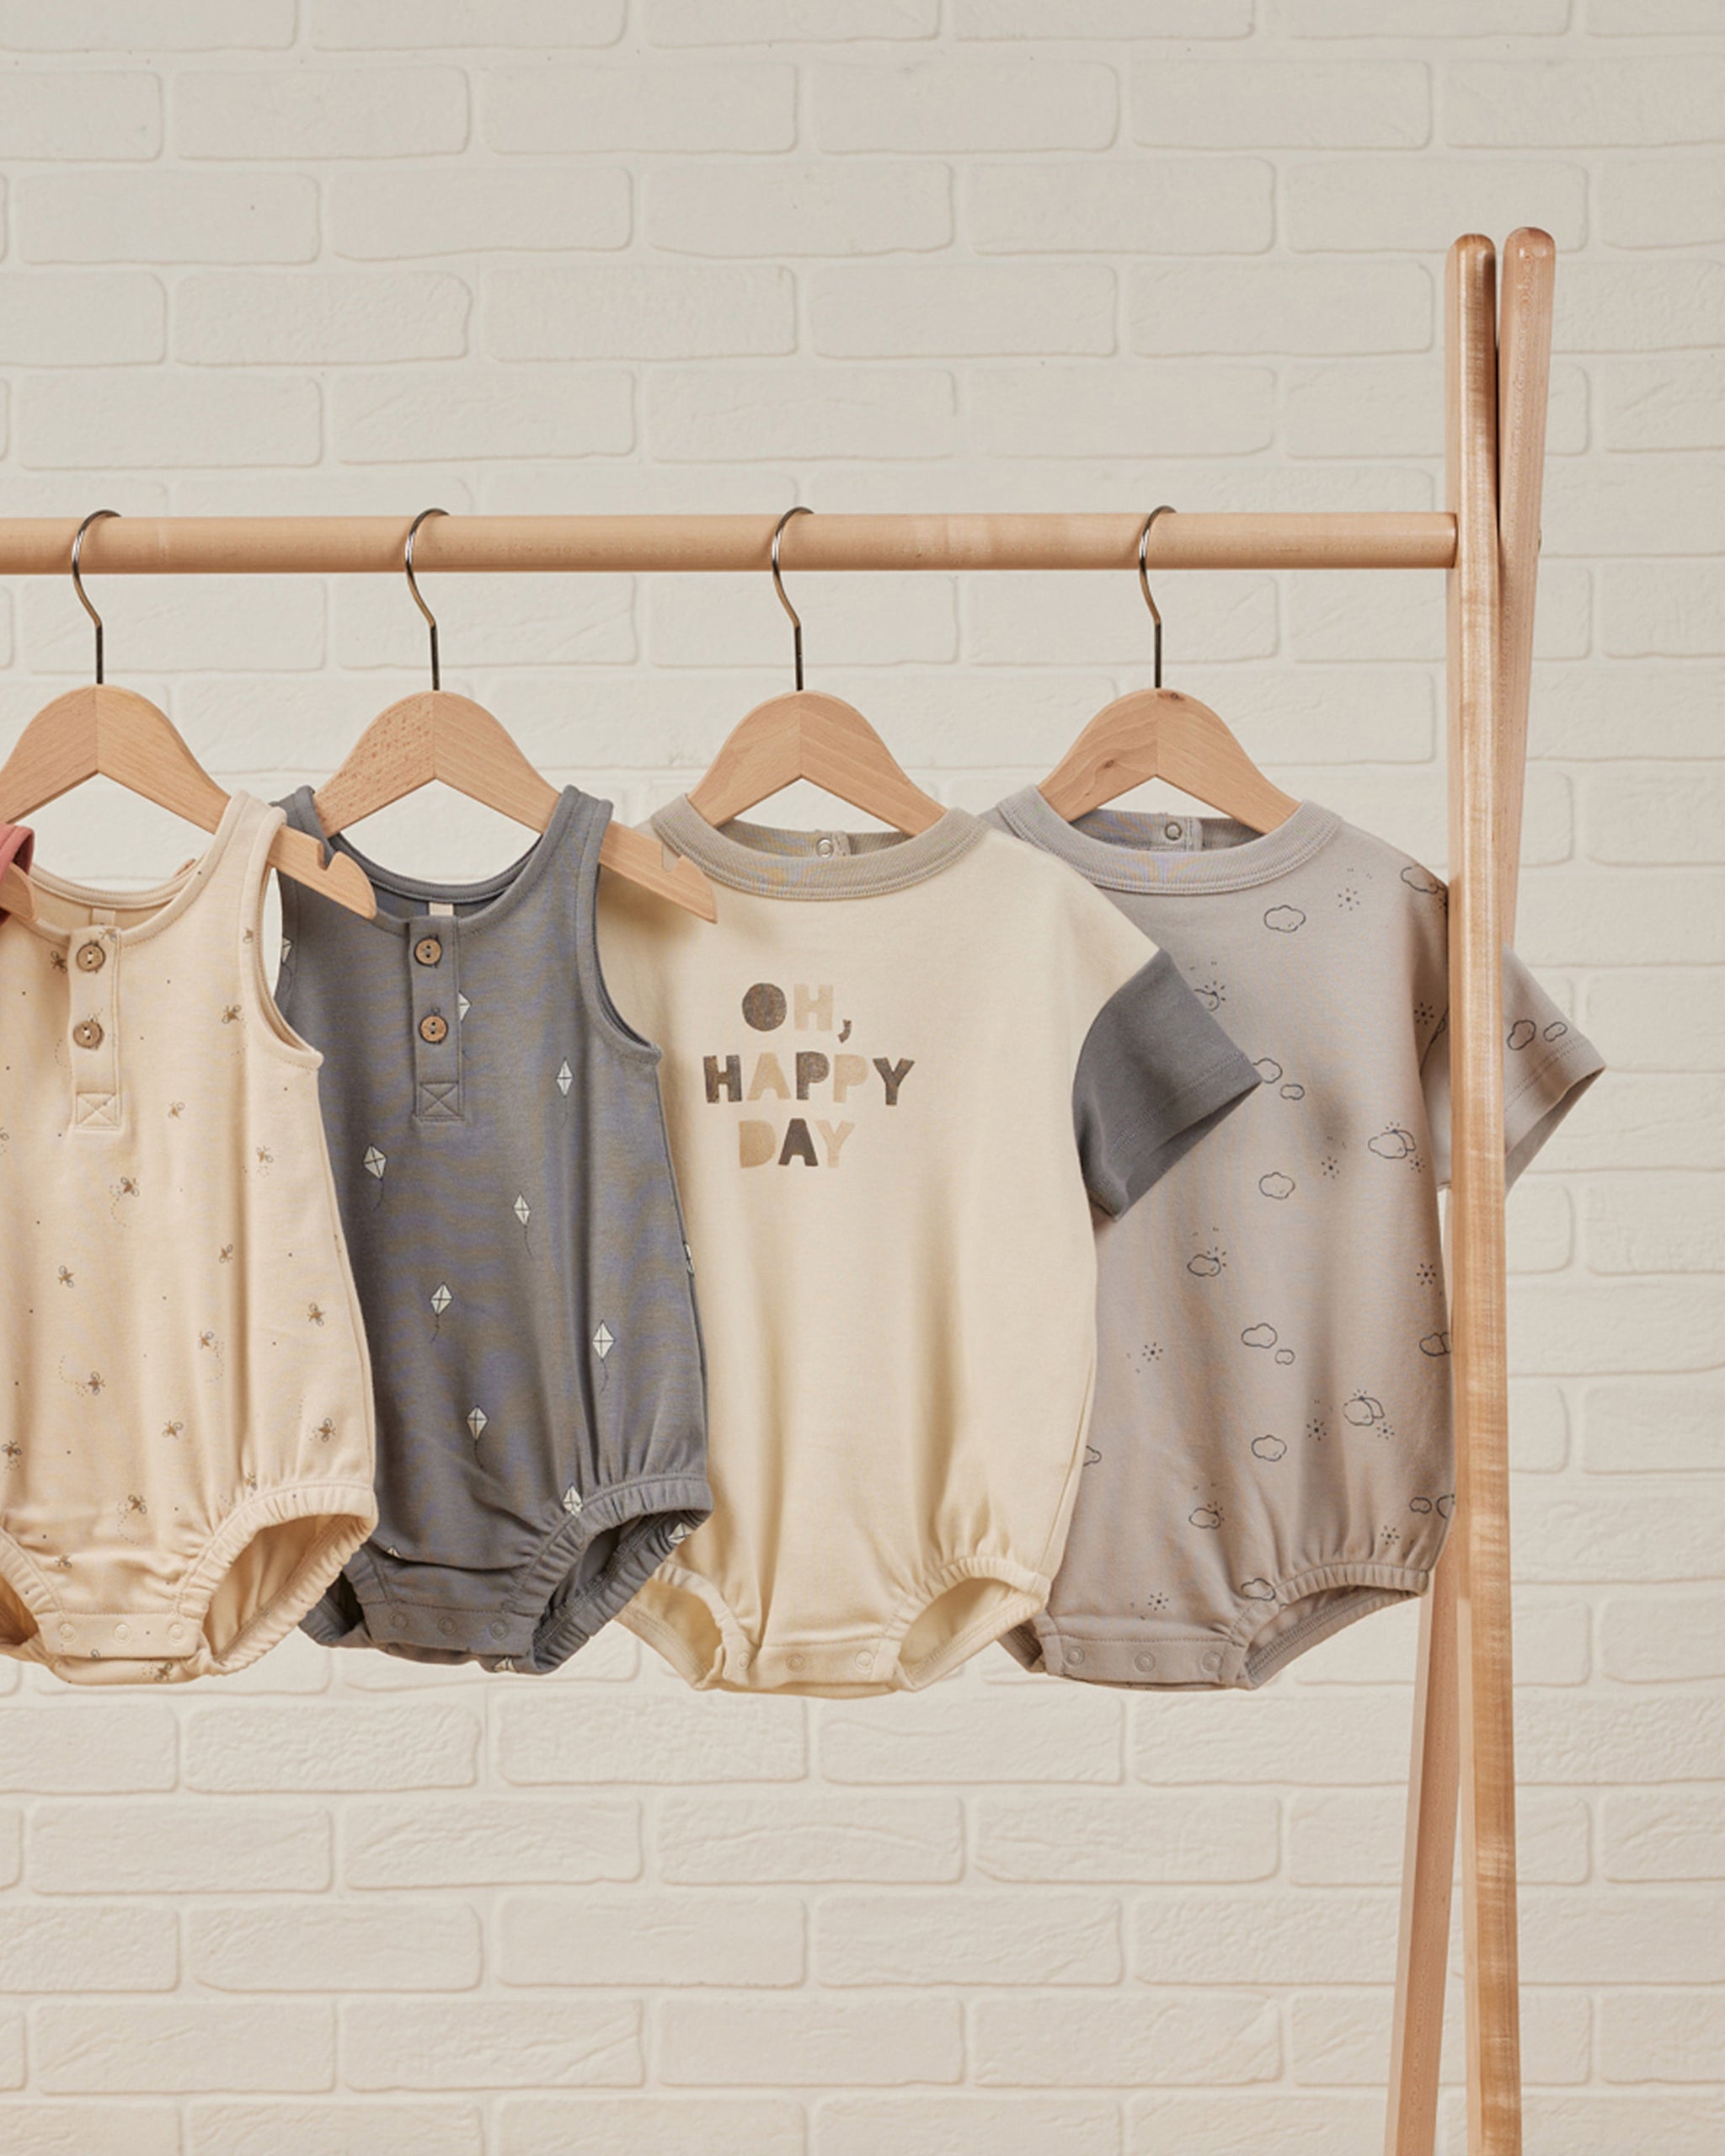 Relaxed Bubble Romper || Oh, Happy Day - Rylee + Cru | Kids Clothes | Trendy Baby Clothes | Modern Infant Outfits |